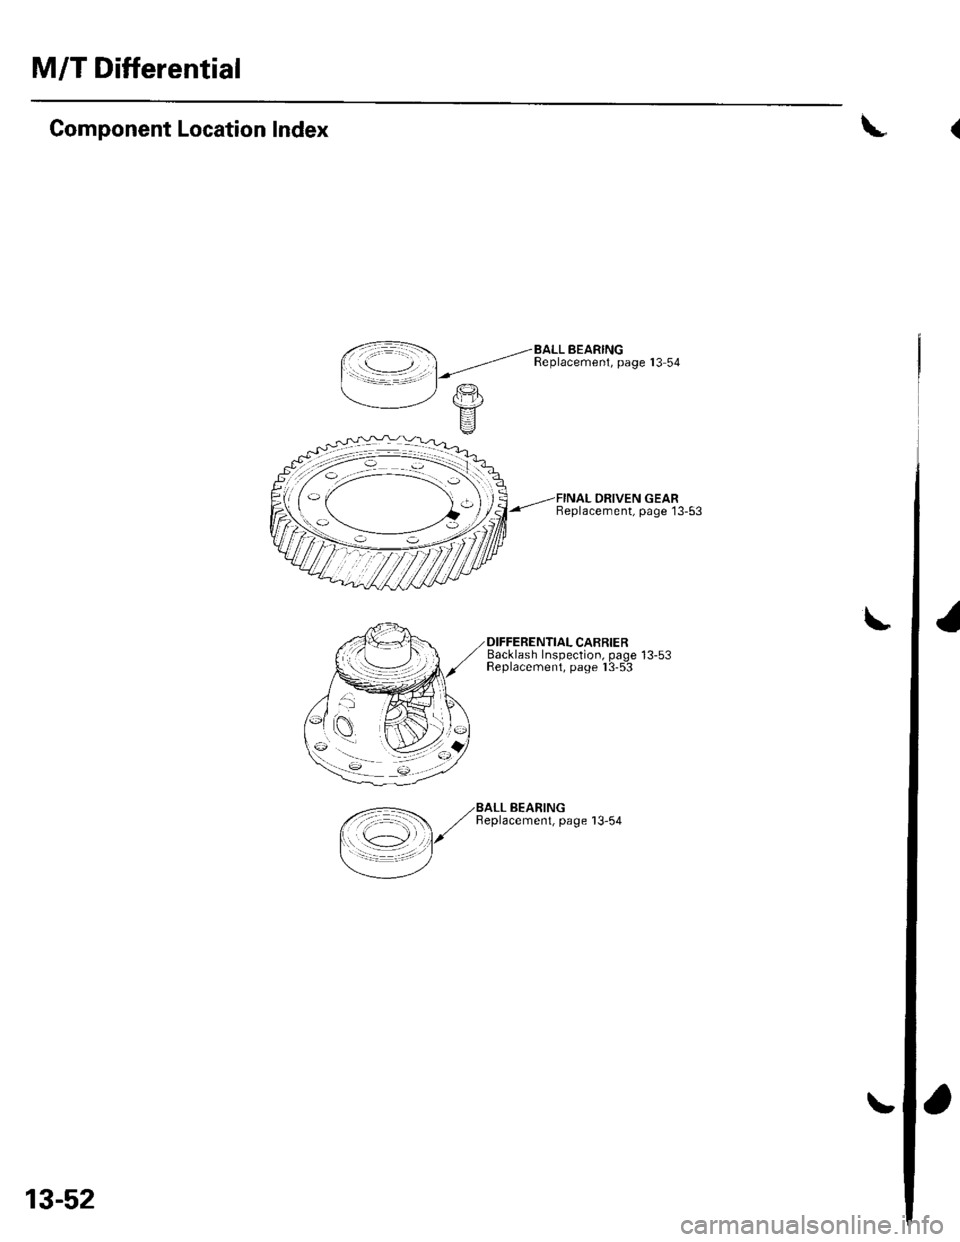 HONDA CIVIC 2003 7.G Workshop Manual M/T Differential
Component Location Index
DRIVEN GEARBeplacement, page 13-53
Backlash Insoection. oaoe 13-53Feplacemeni, paoe I 3-5-3
\
\
,<-=- ,/BALL BEARING
/  ,/ Beplacemenl, page 13-54
I \c1 l/
 =